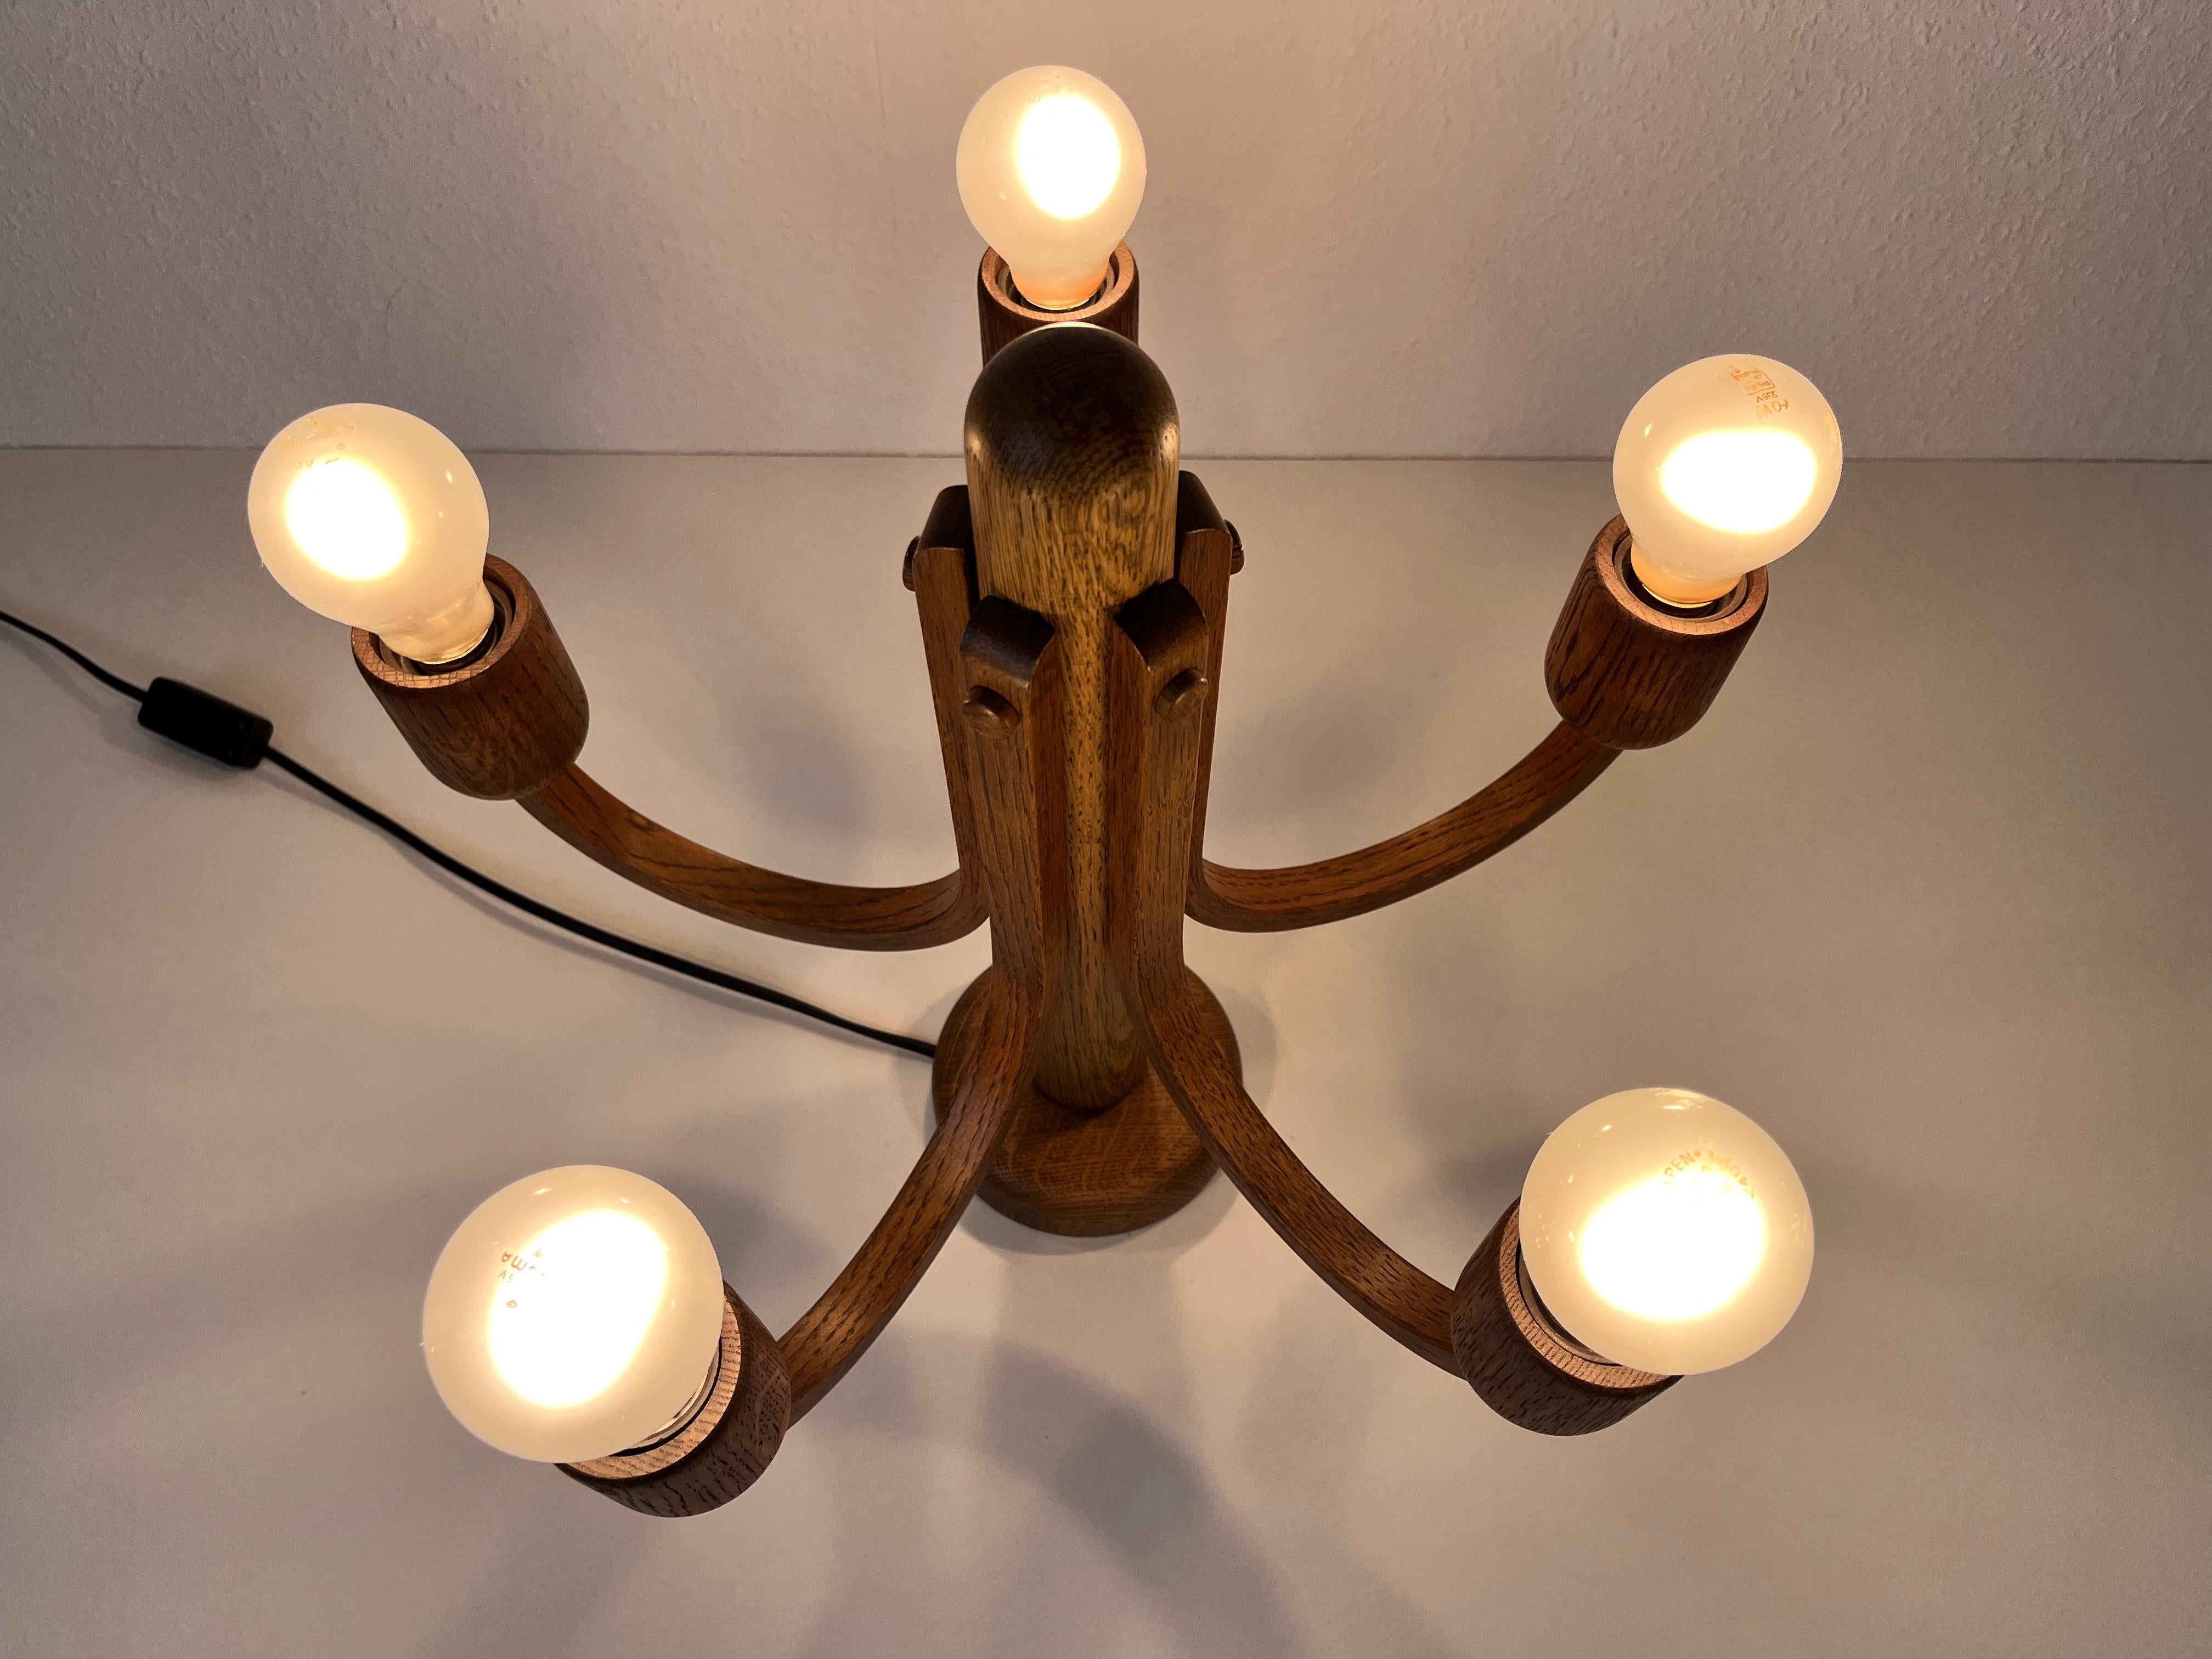 Midcentury Wooden Pendant Lamp with 5 Arms by Domus, 1960s For Sale 3